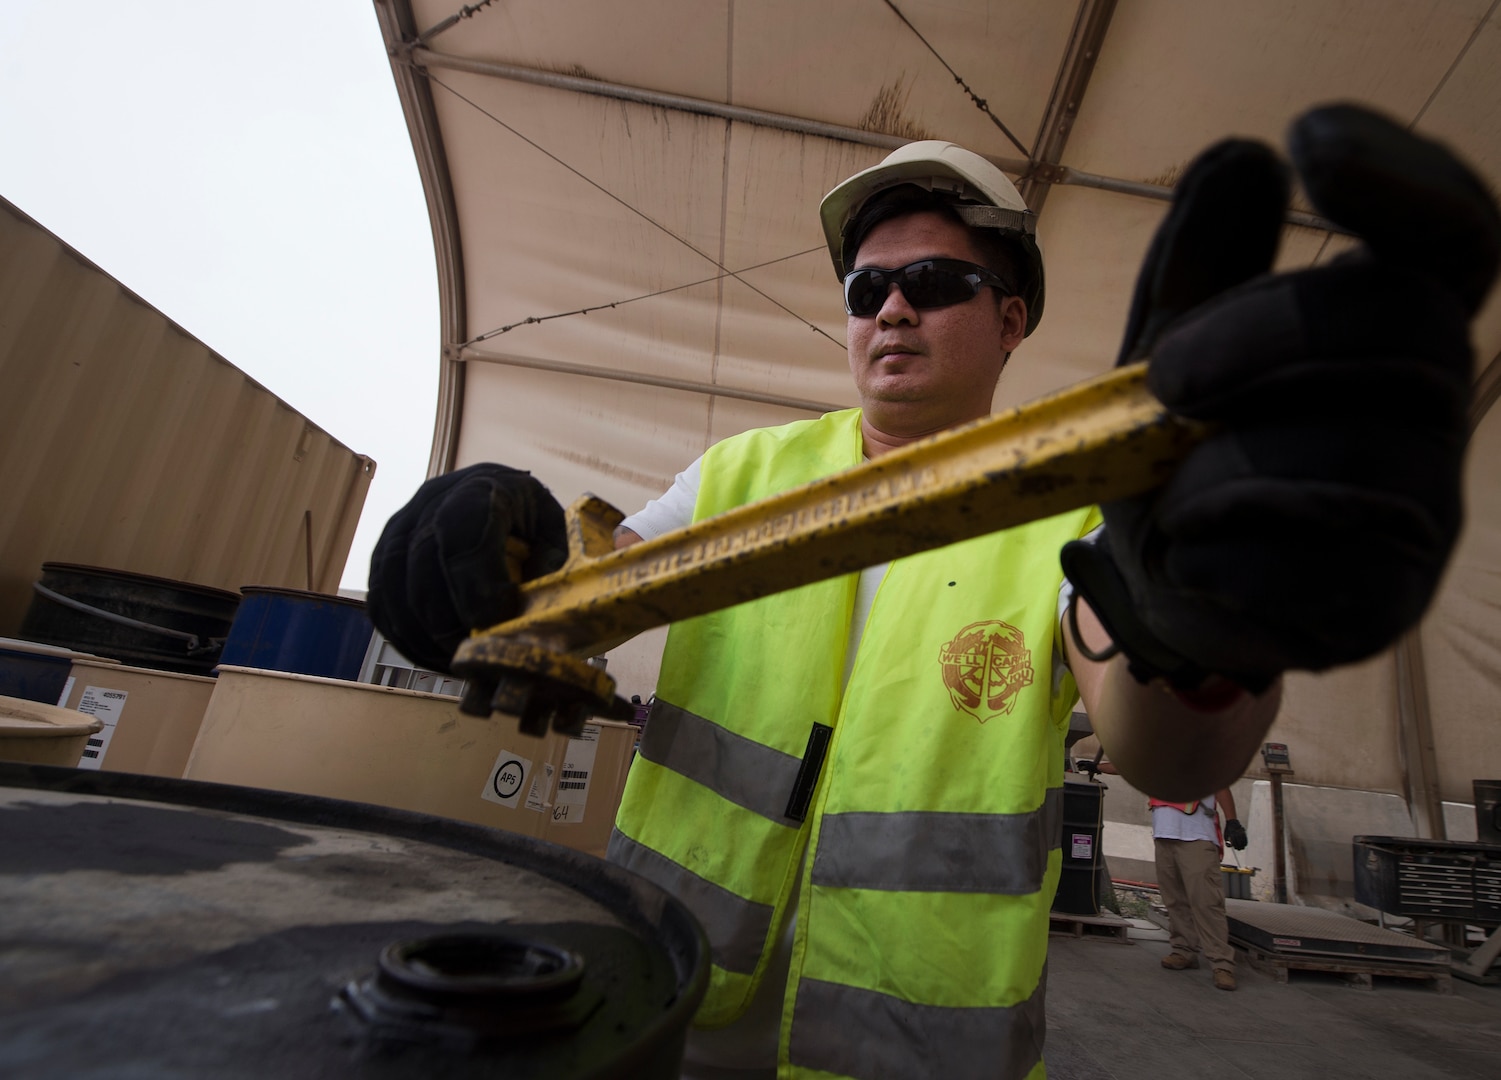 John Reyes, 379th Expeditionary Civil Engineer Squadron (ECES) environmental technician, releases pressure from an oil drum March 26, 2019, at Al Udeid Air Base, Qatar. Recyclable items such as glass and plastic bottles that are thrown in trash dumpsters at Al Udeid are sorted and recycled at locations off the installation. (U.S. Air Force photo by Tech. Sgt. Christopher Hubenthal)